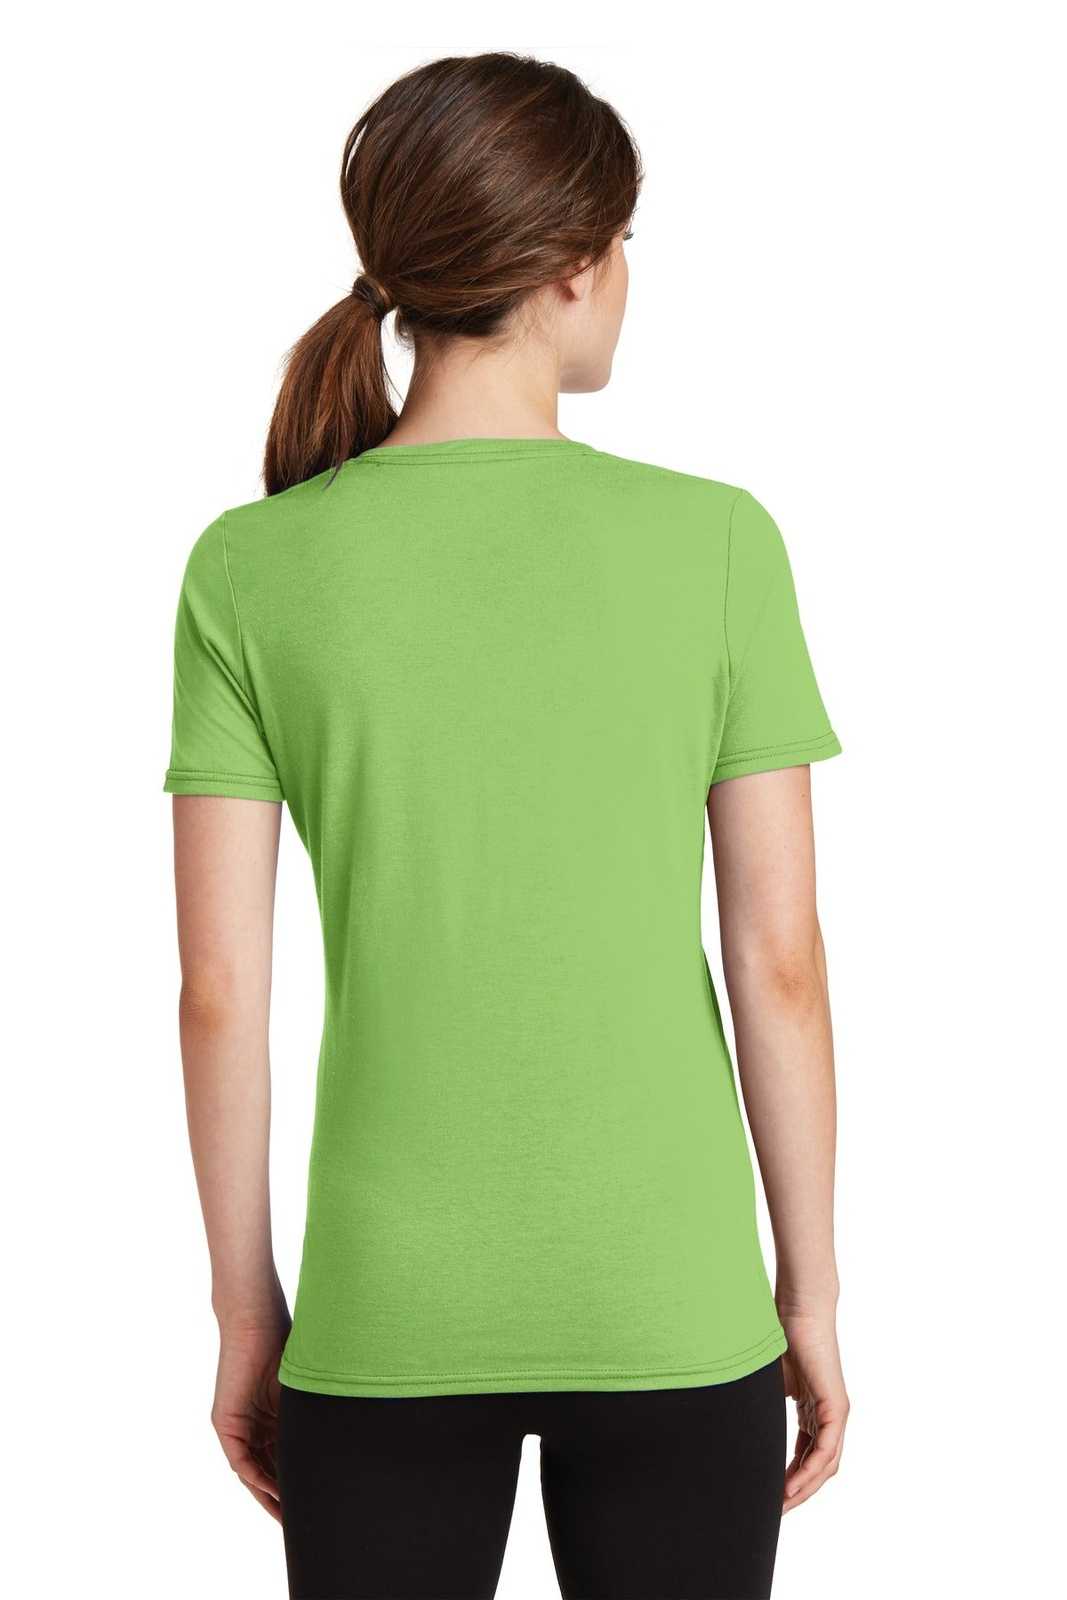 Port & Company LPC381V Ladies Performance Blend V-Neck Tee - Lime - HIT a Double - 1